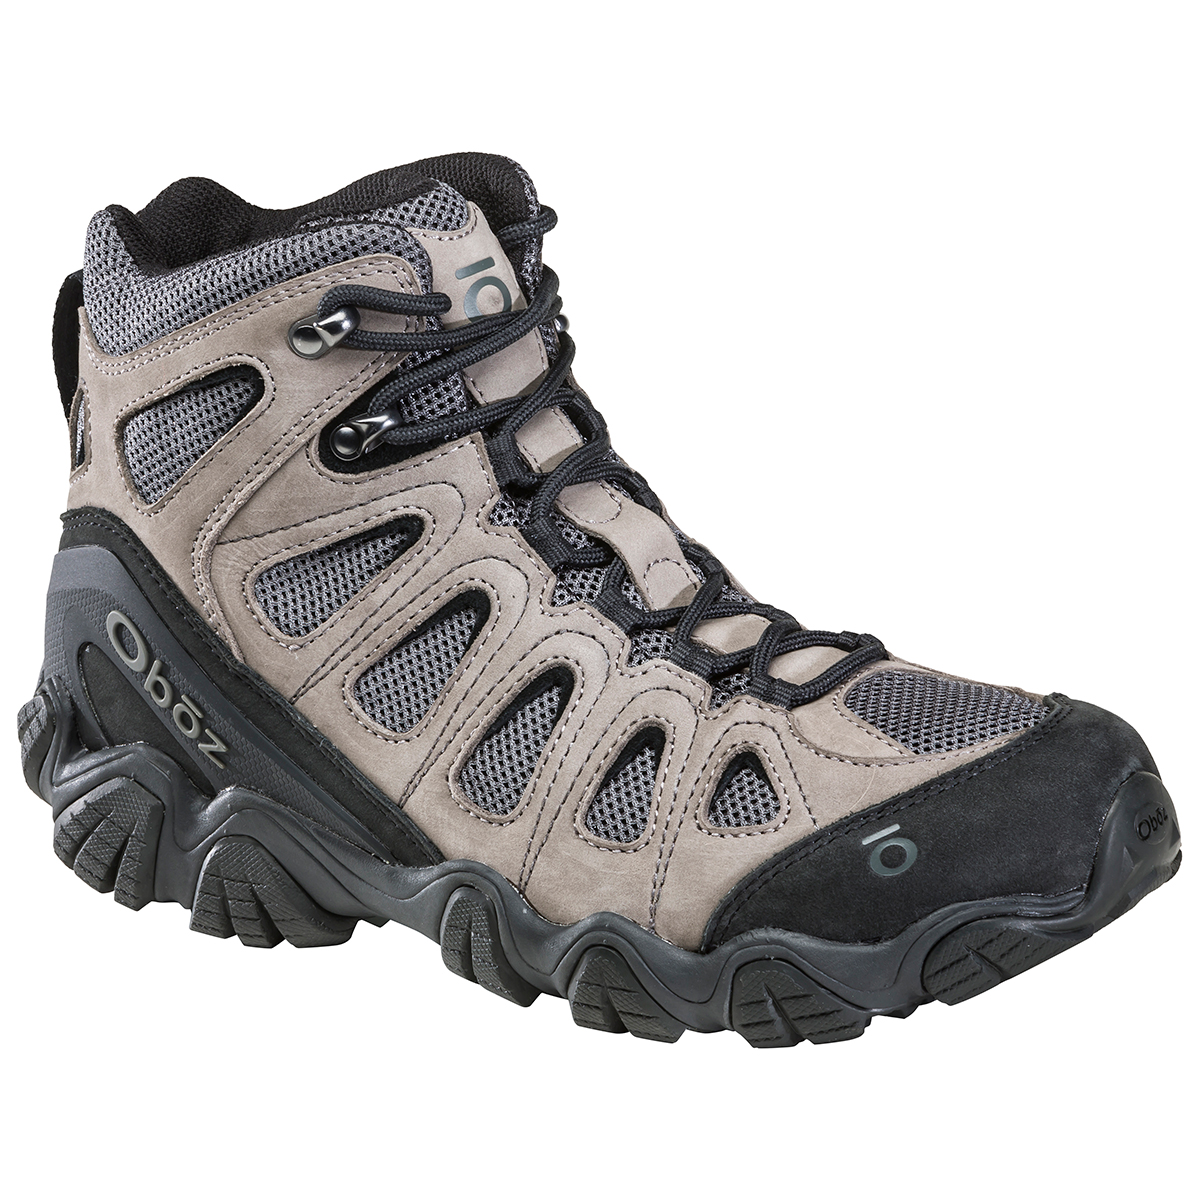 Oboz Men's Sawtooth Ii Mid Hiking Boots - Size 13